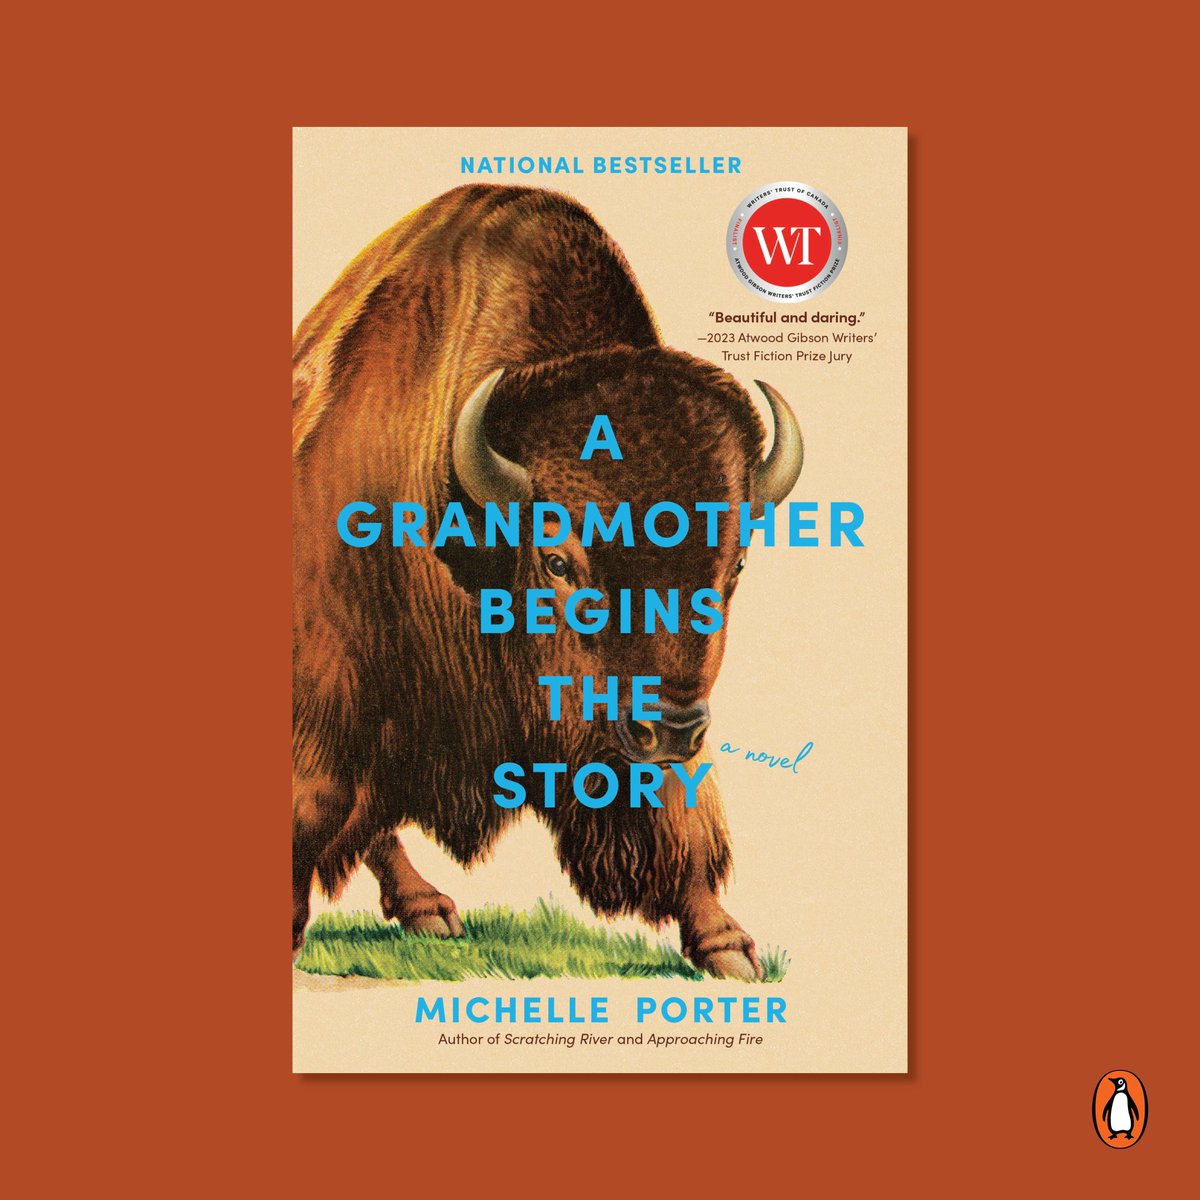 A national bestseller and finalist for the Writers' Trust Atwood Gibson Fiction Prize, this brilliant novel tells the story of five generations of Métis women, through a chorus of vividly realized characters. Michelle Porter's A GRANDMOTHER BEGINS THE STORY is out in paperback!